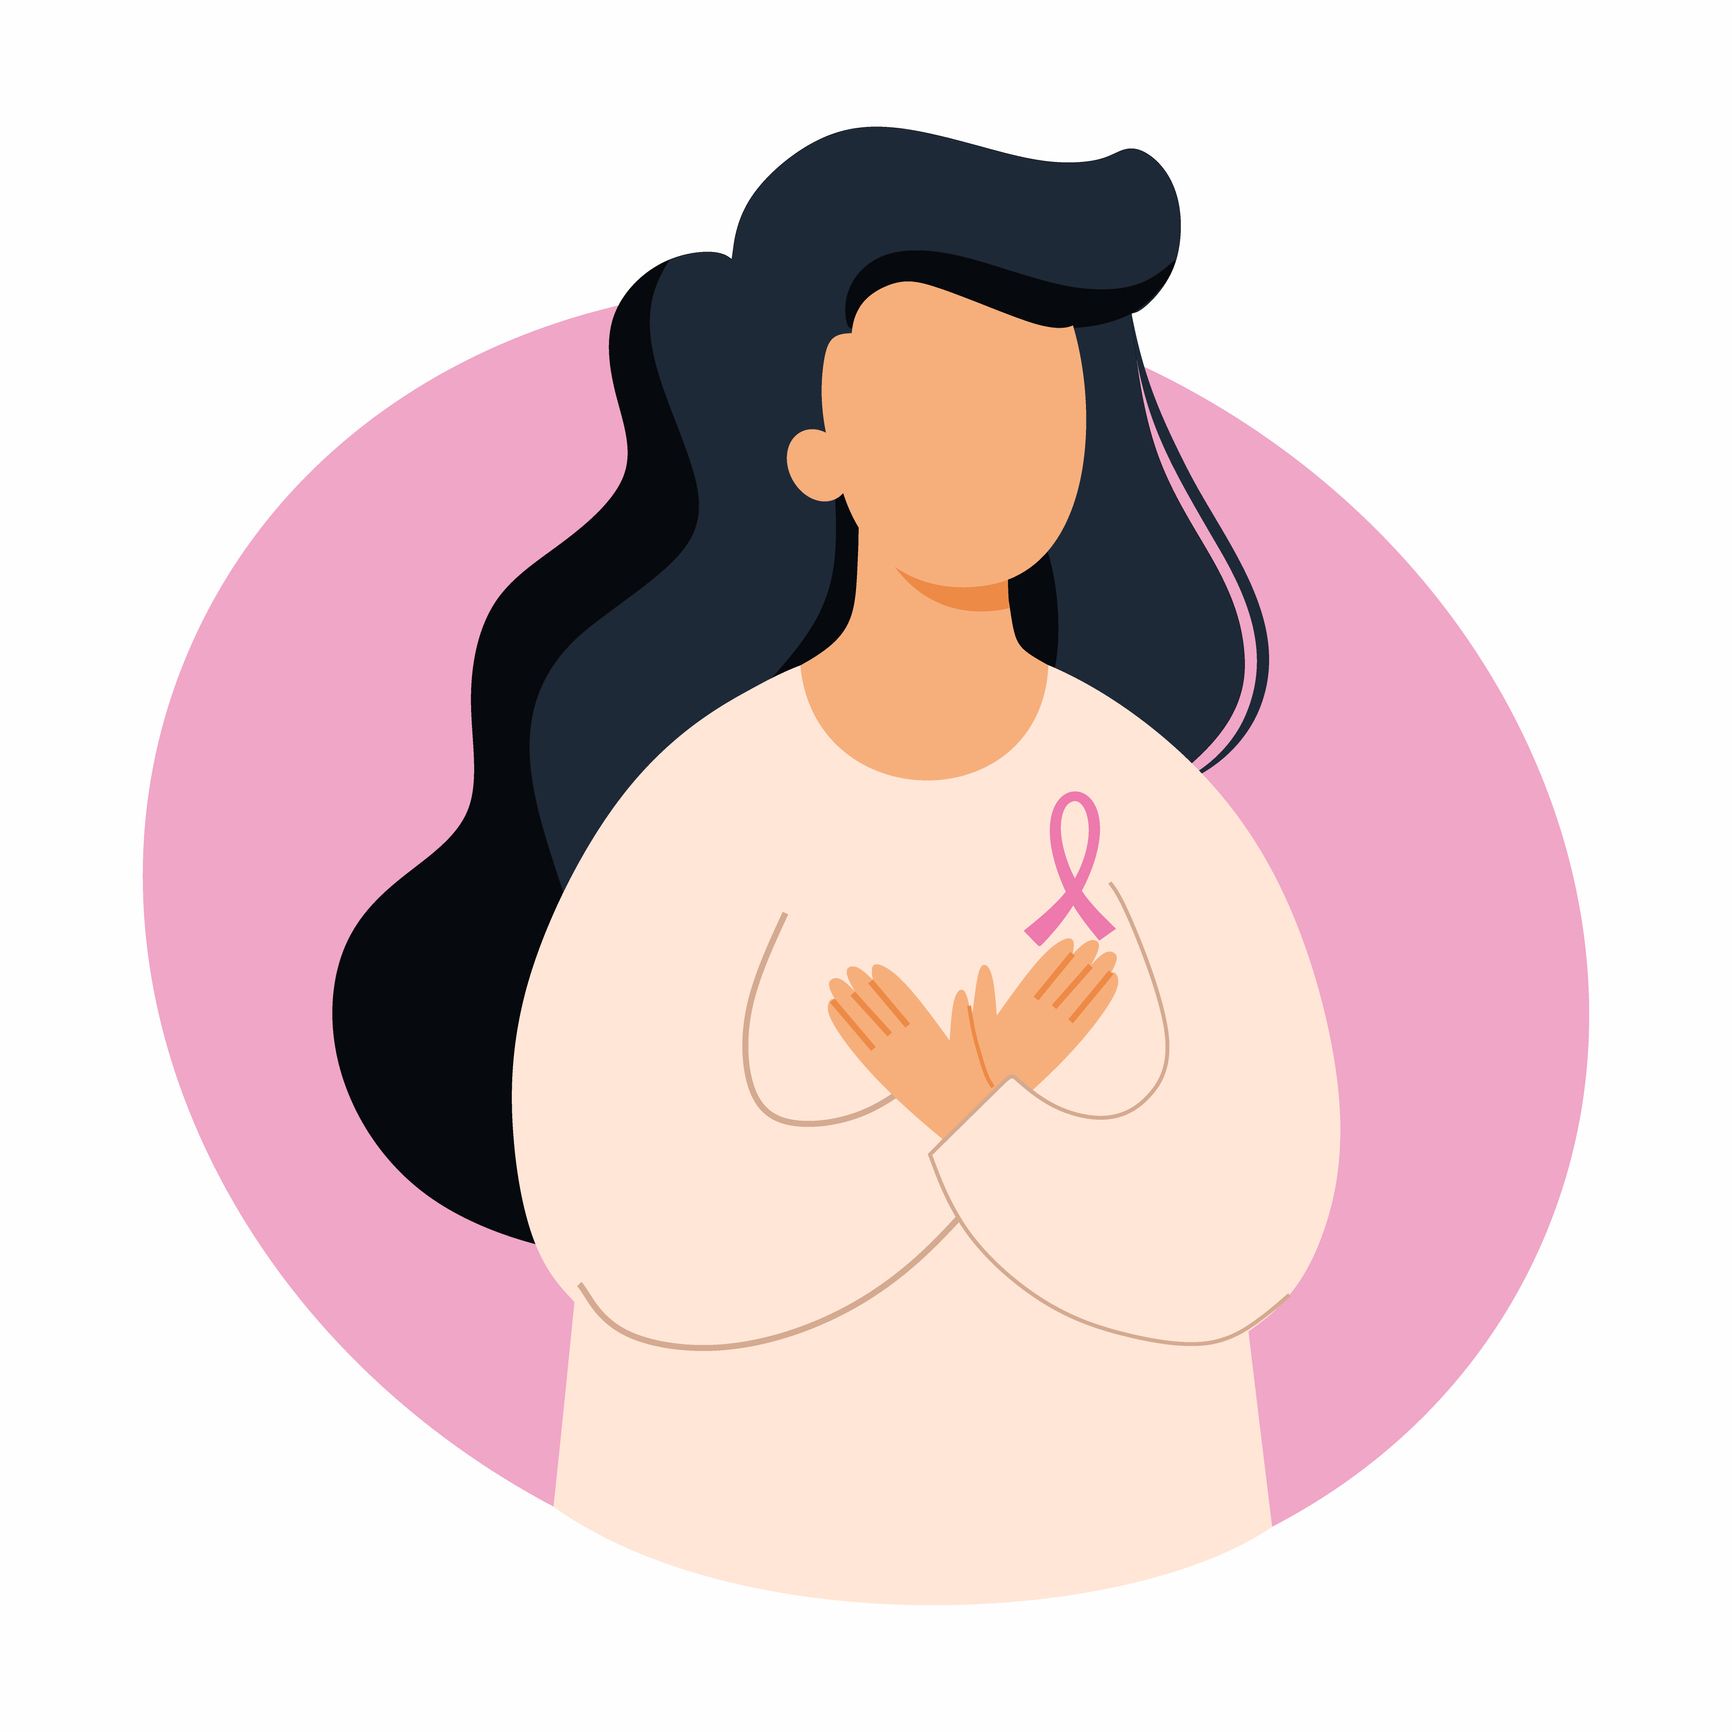 woman holds hands on chest breast cancer awareness day health problems vector illustration on topic of medicine symptom of disease